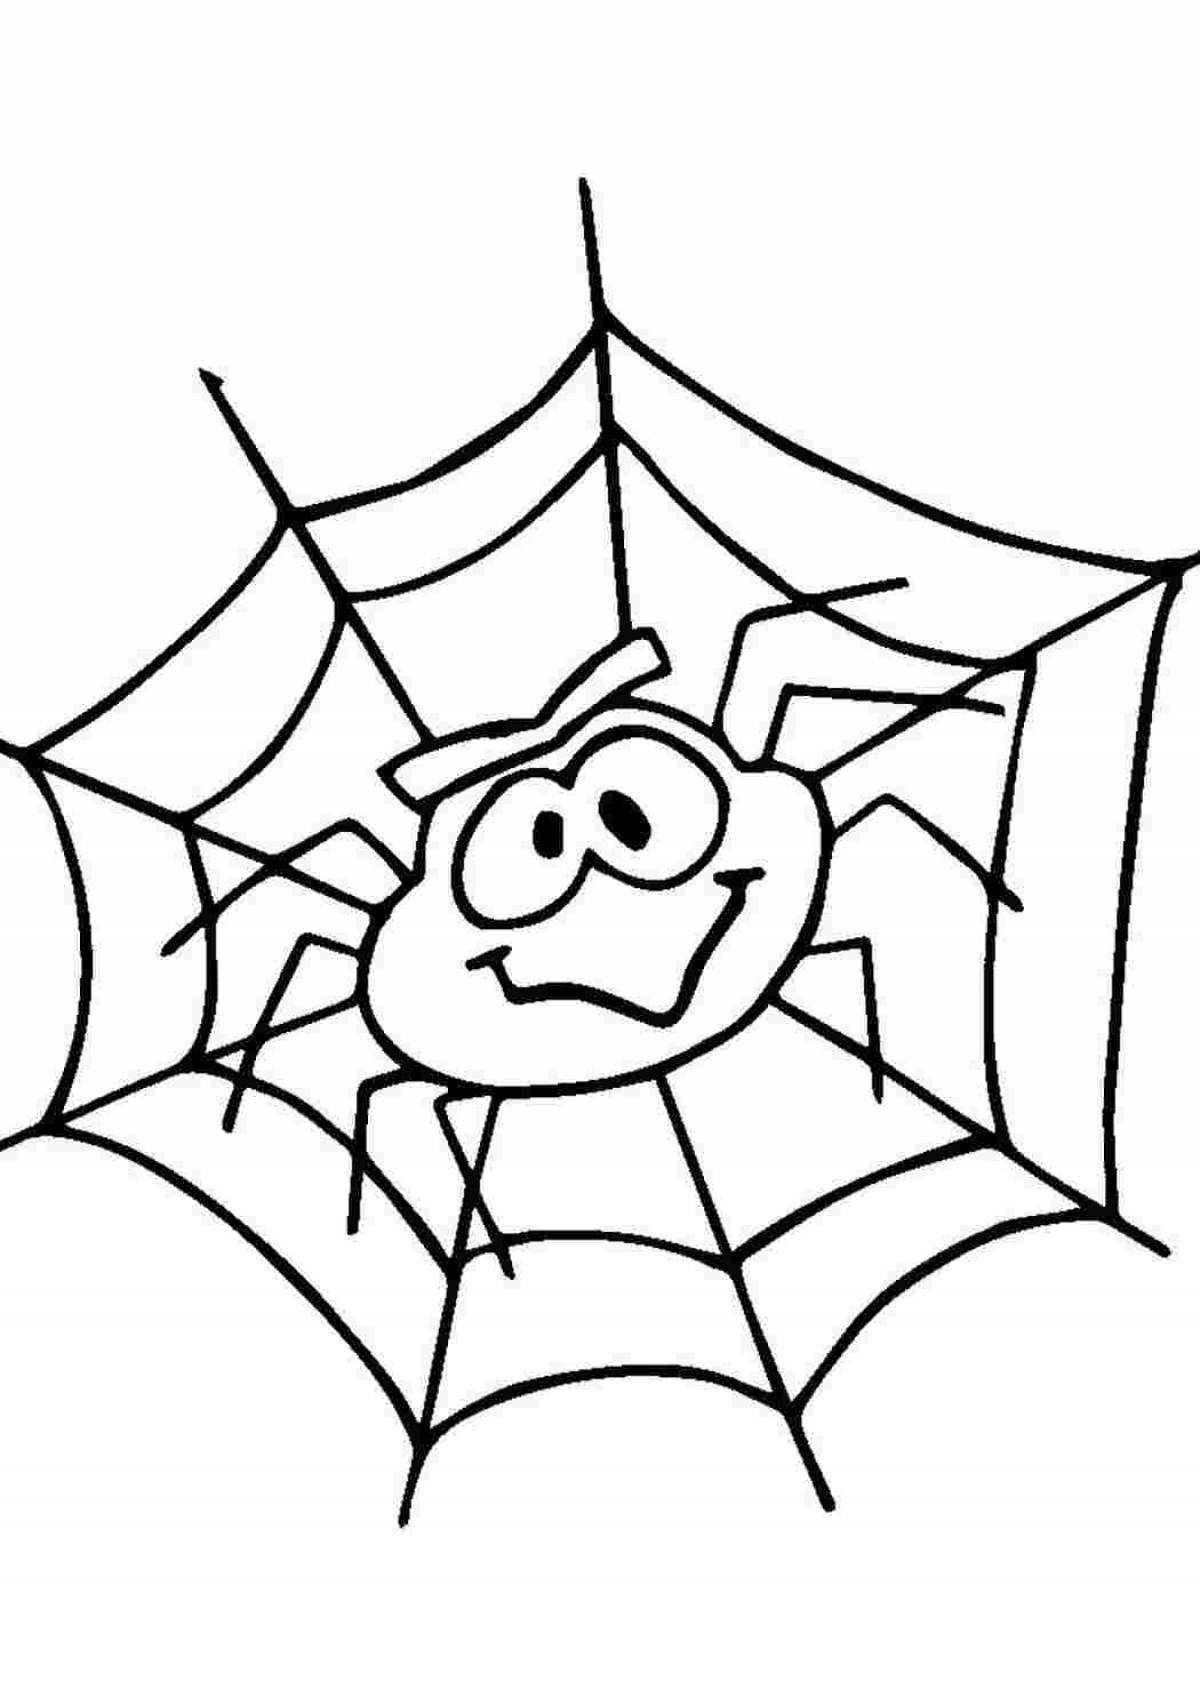 Spider Live Coloring Page for Beginners